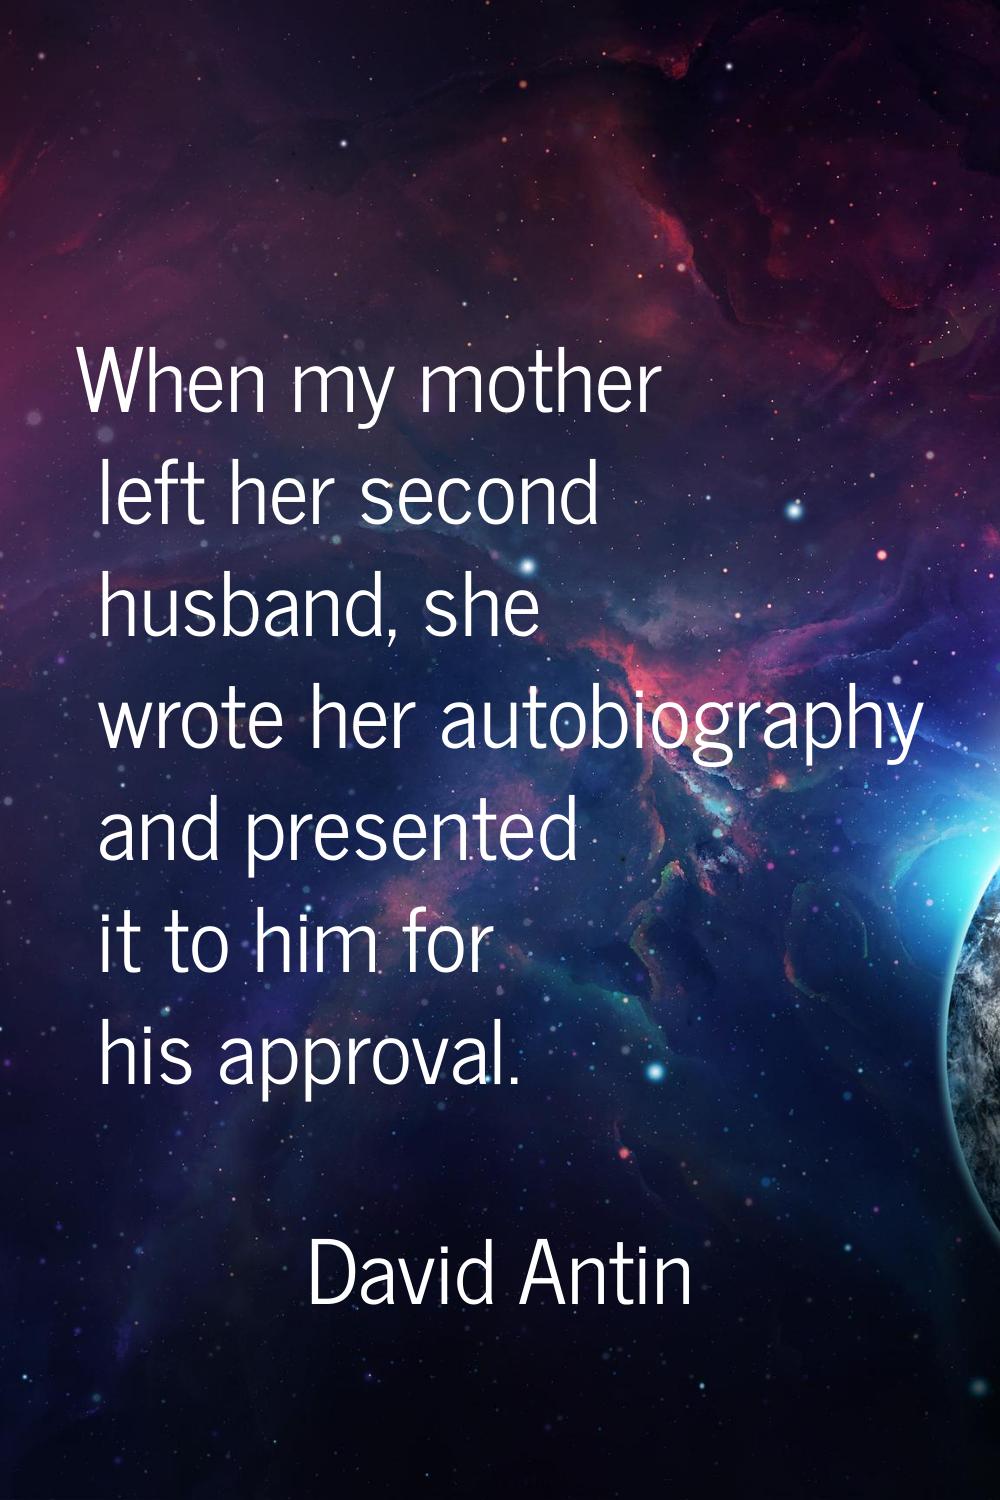 When my mother left her second husband, she wrote her autobiography and presented it to him for his